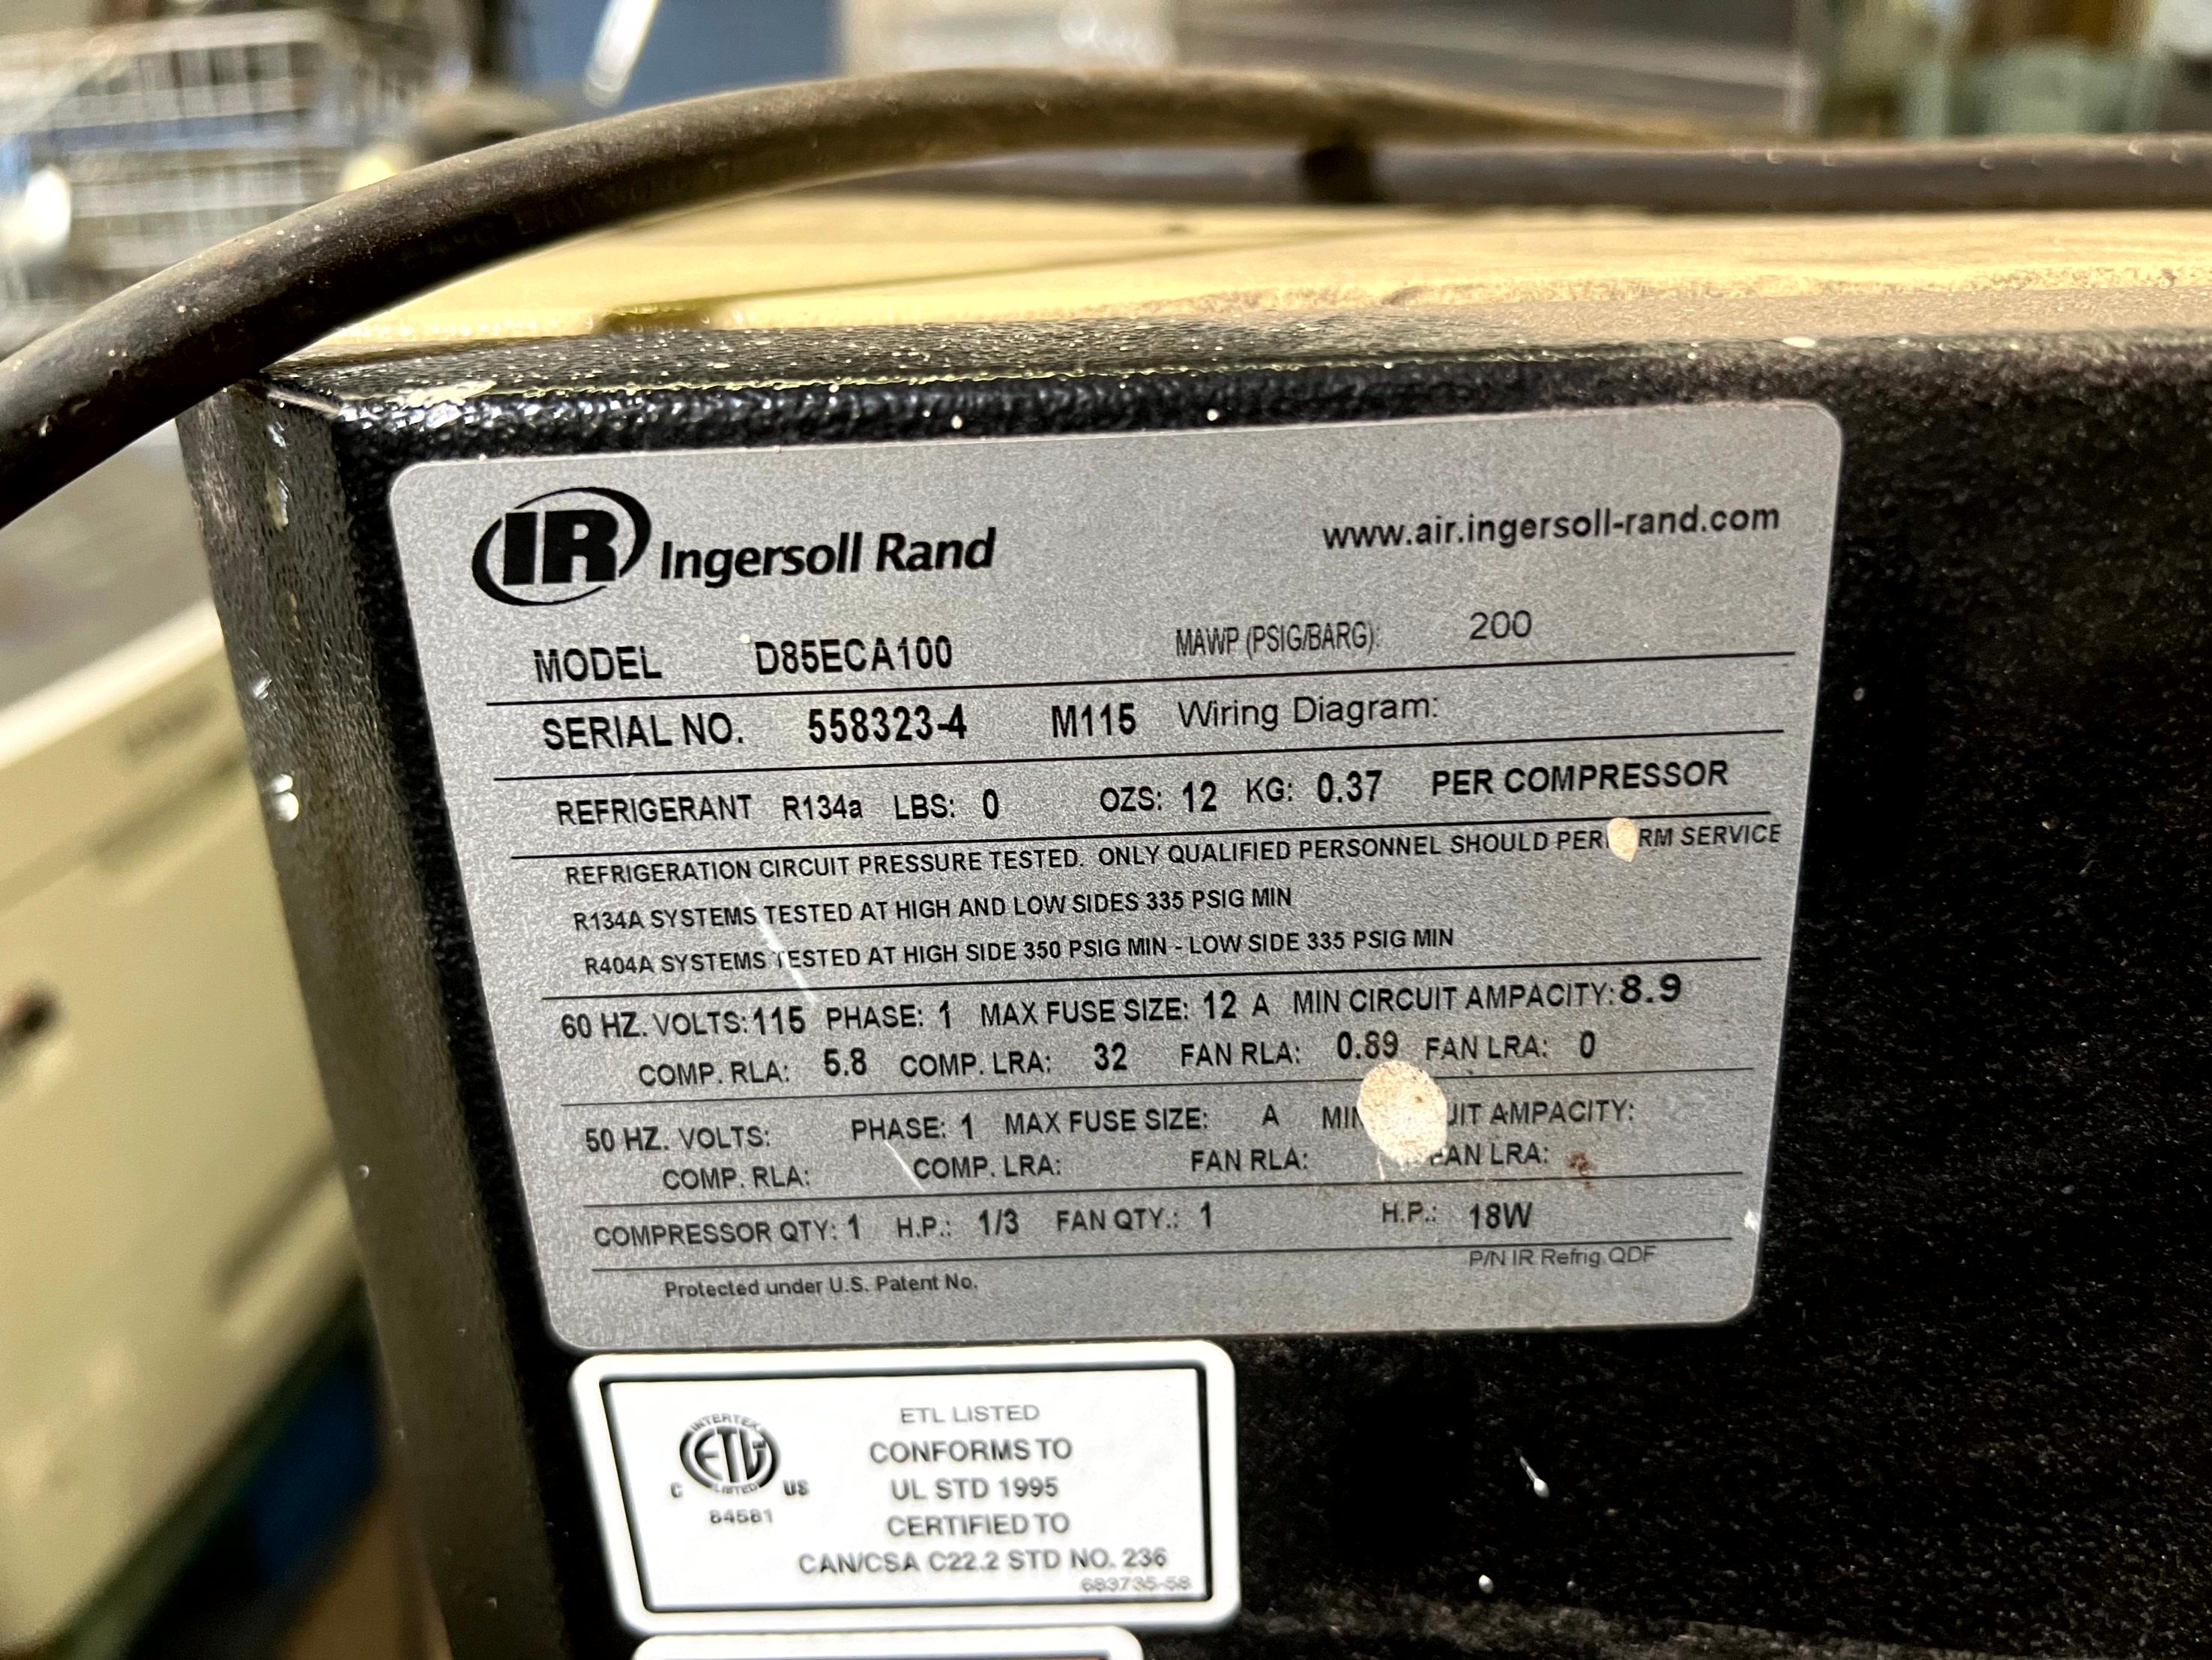 Ingersoll Rand Refrigerated Air Dryer